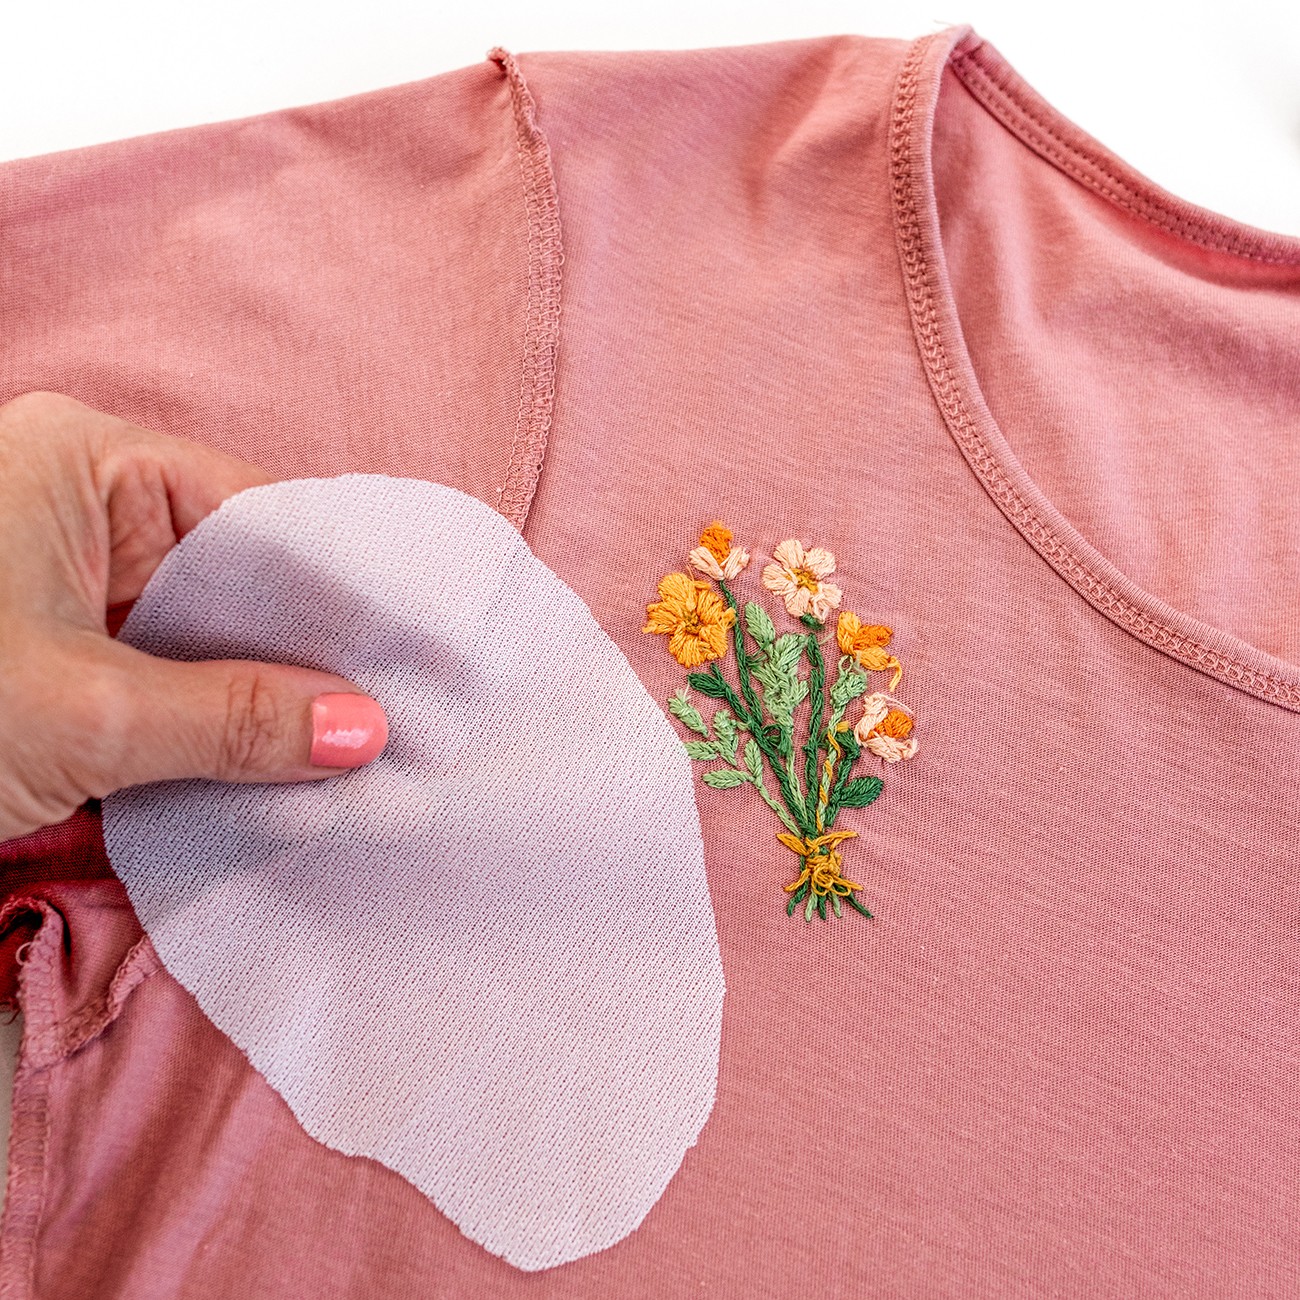 A Beginner's Guide for Embroidery onto Clothing – Clever Poppy